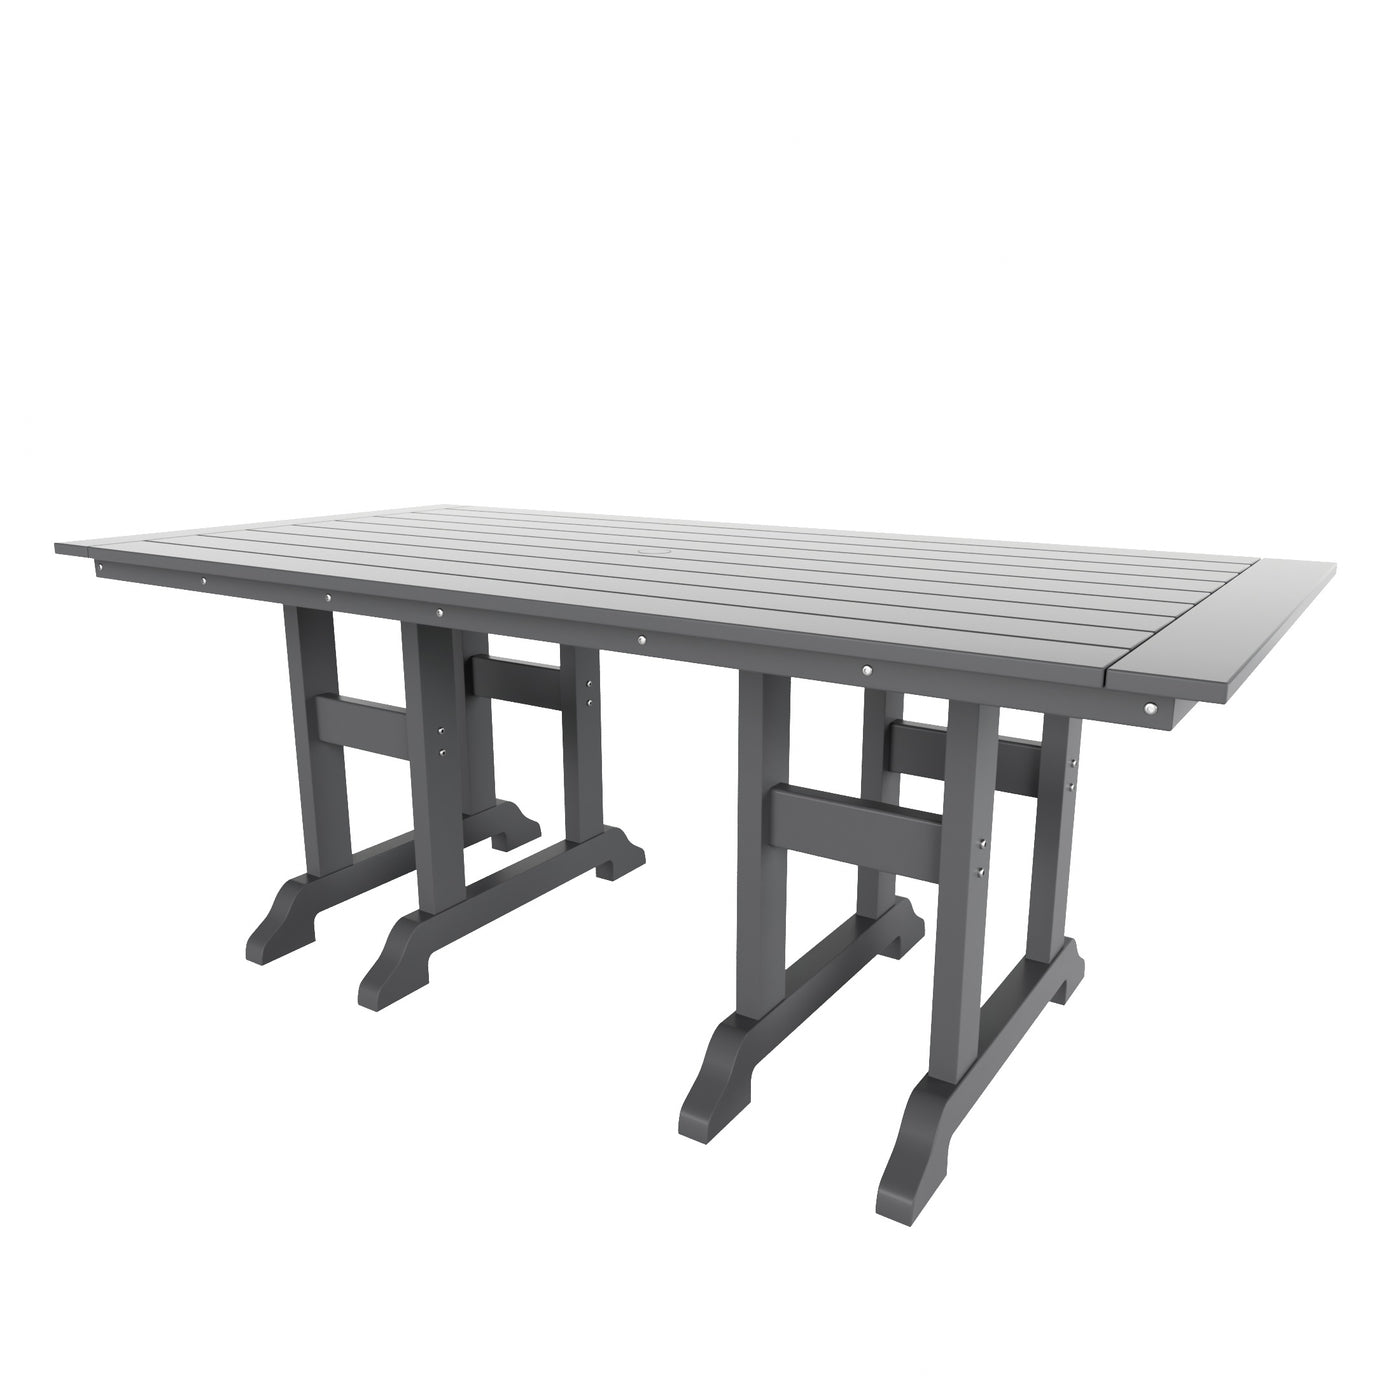 Malibu 71" Rectangle Dining Table for Outdoor Patio